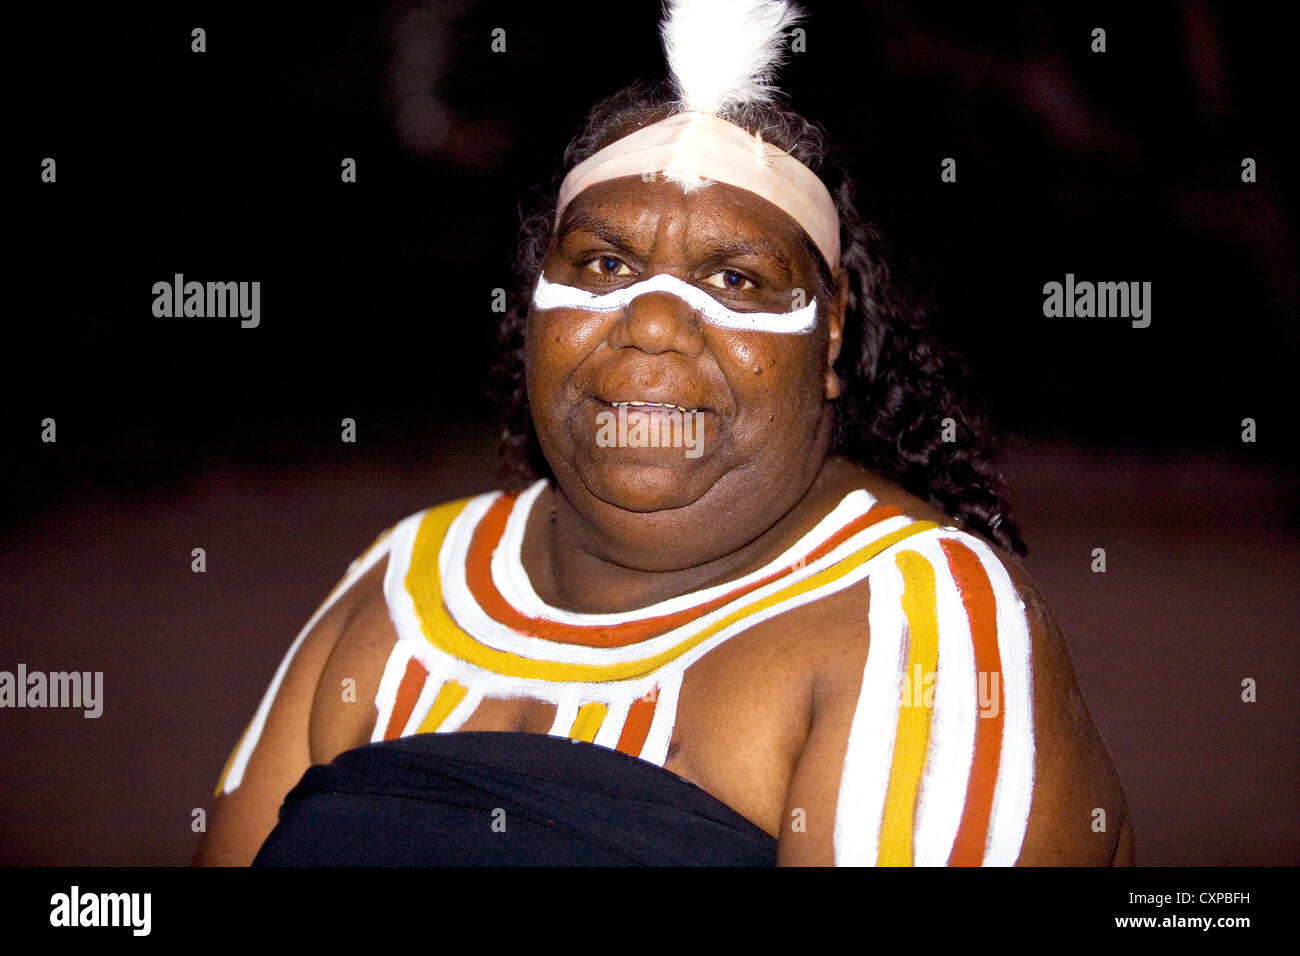 Aboriginal dancer at Simpson's Gap in the McDonnell Ranges west of Alice Springs, Australia Stock Photo